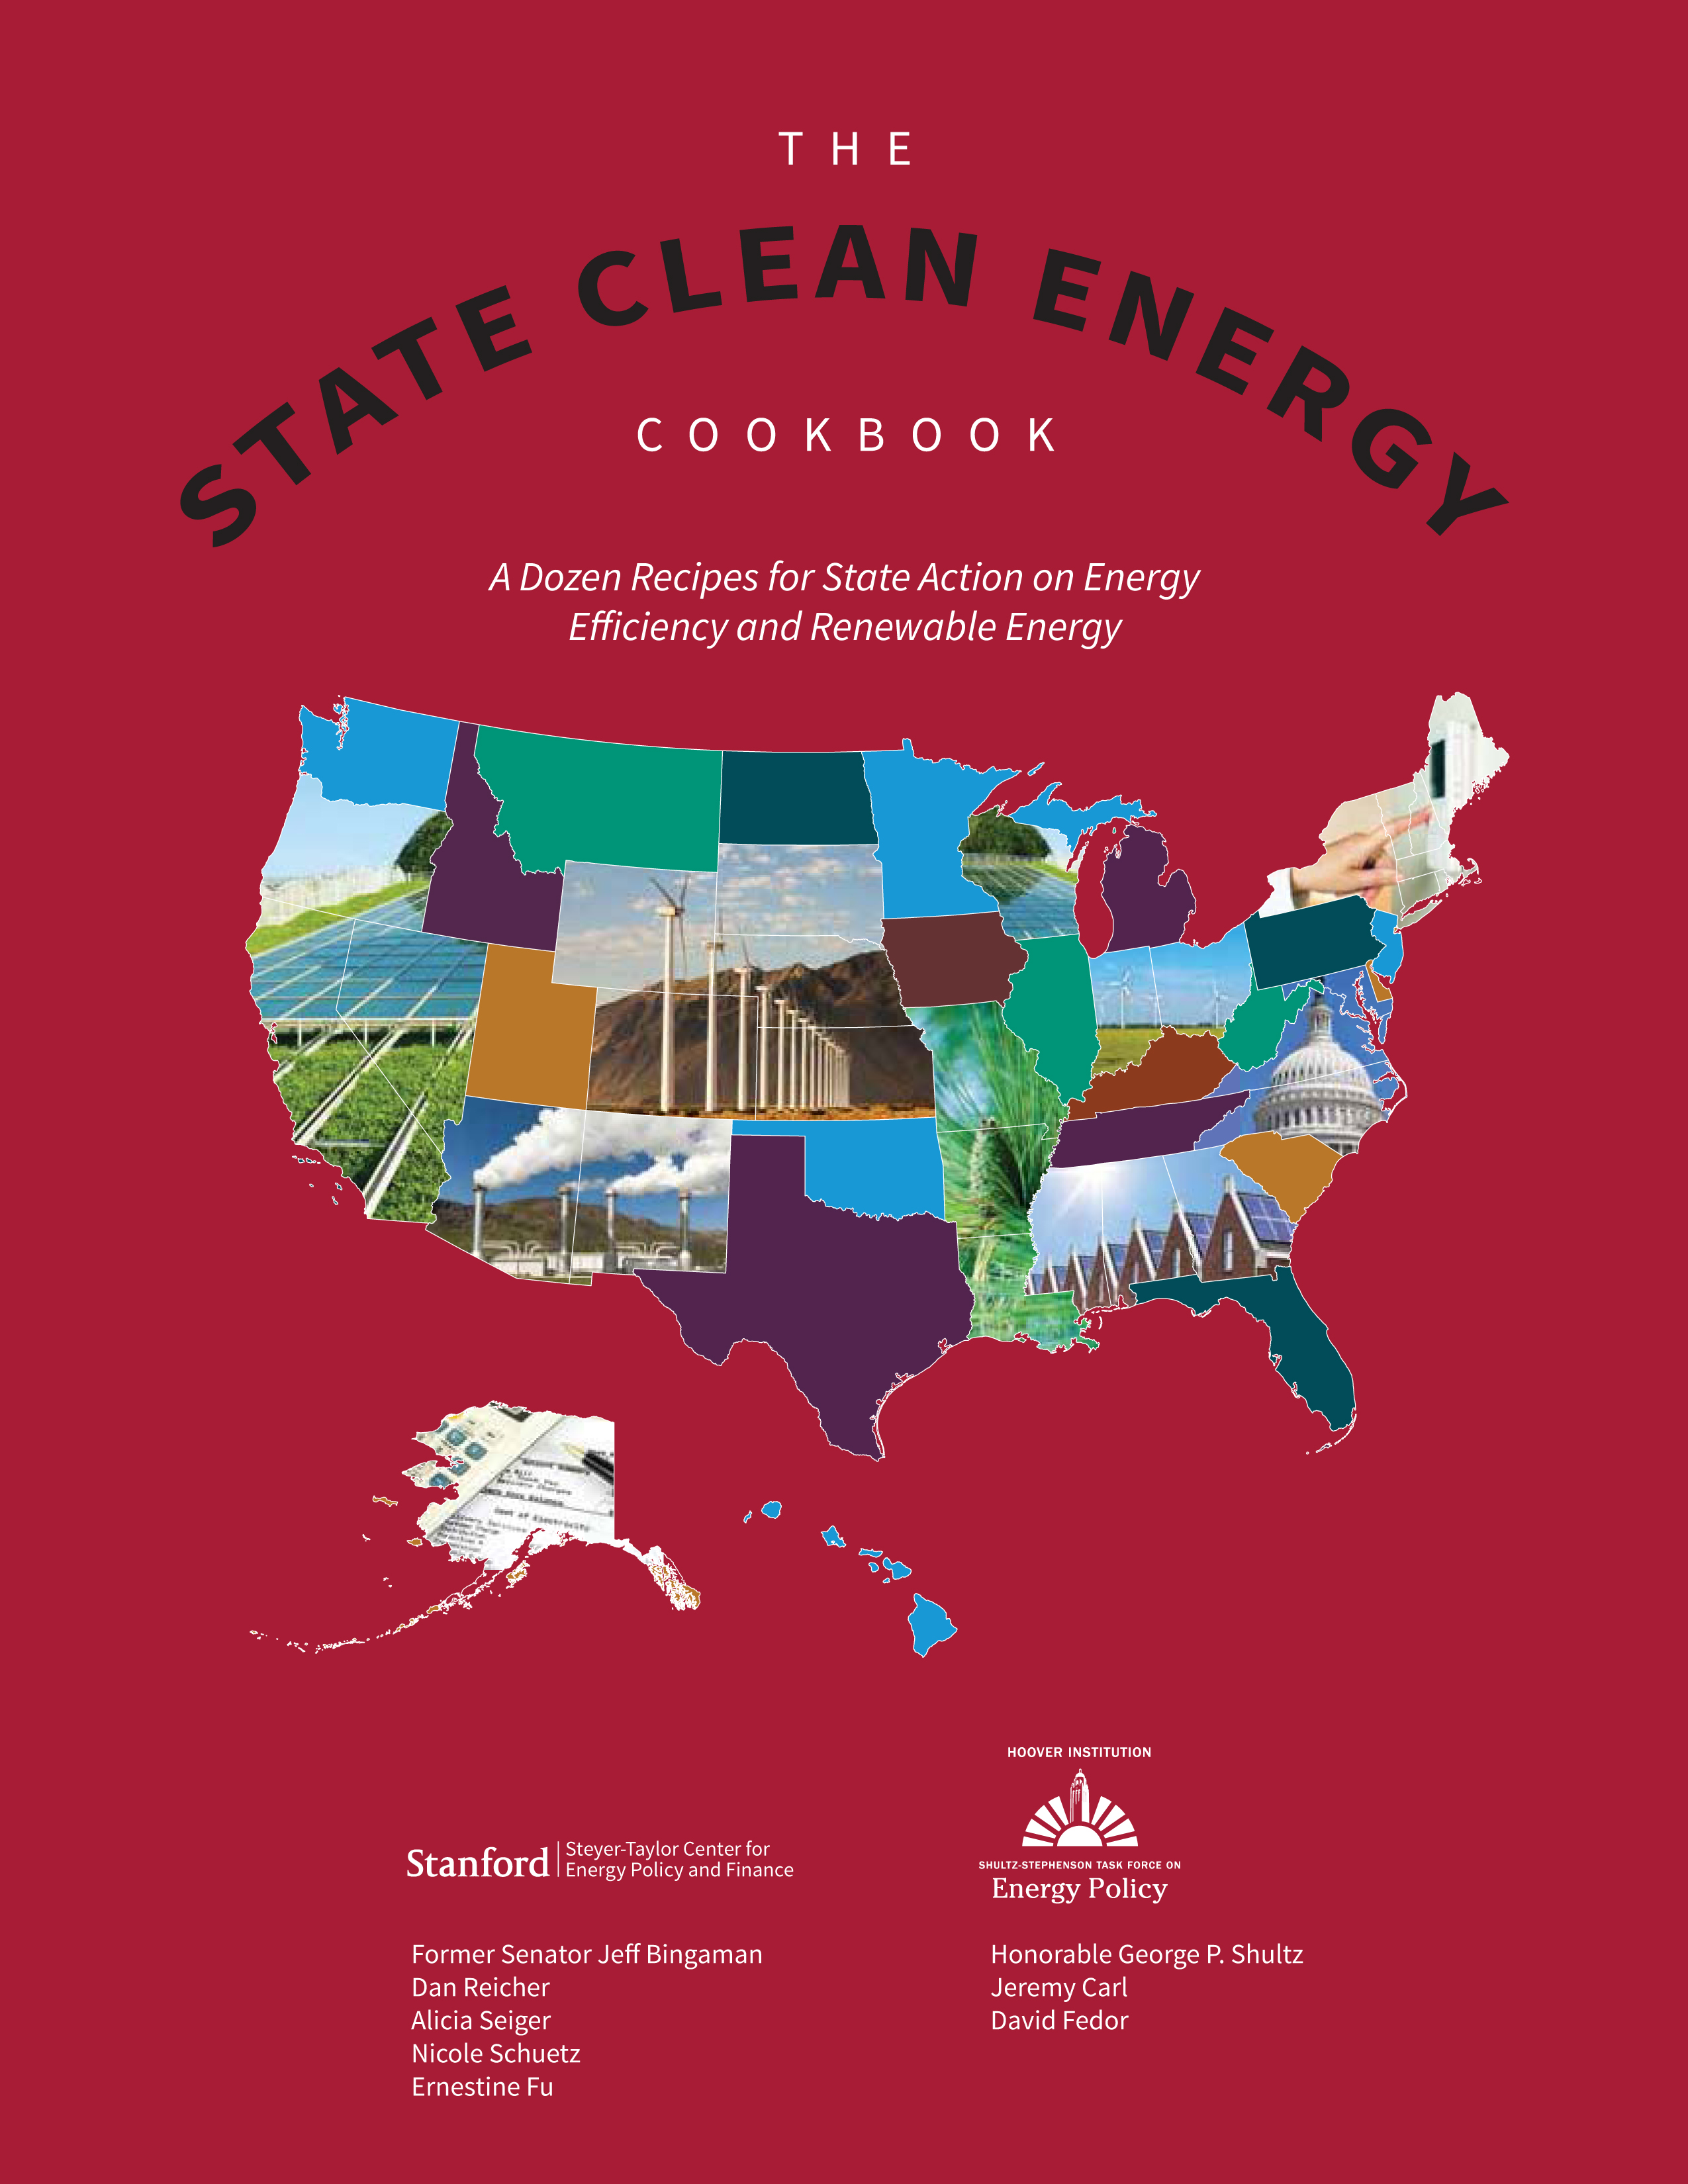 The State Clean Energy Cookbook